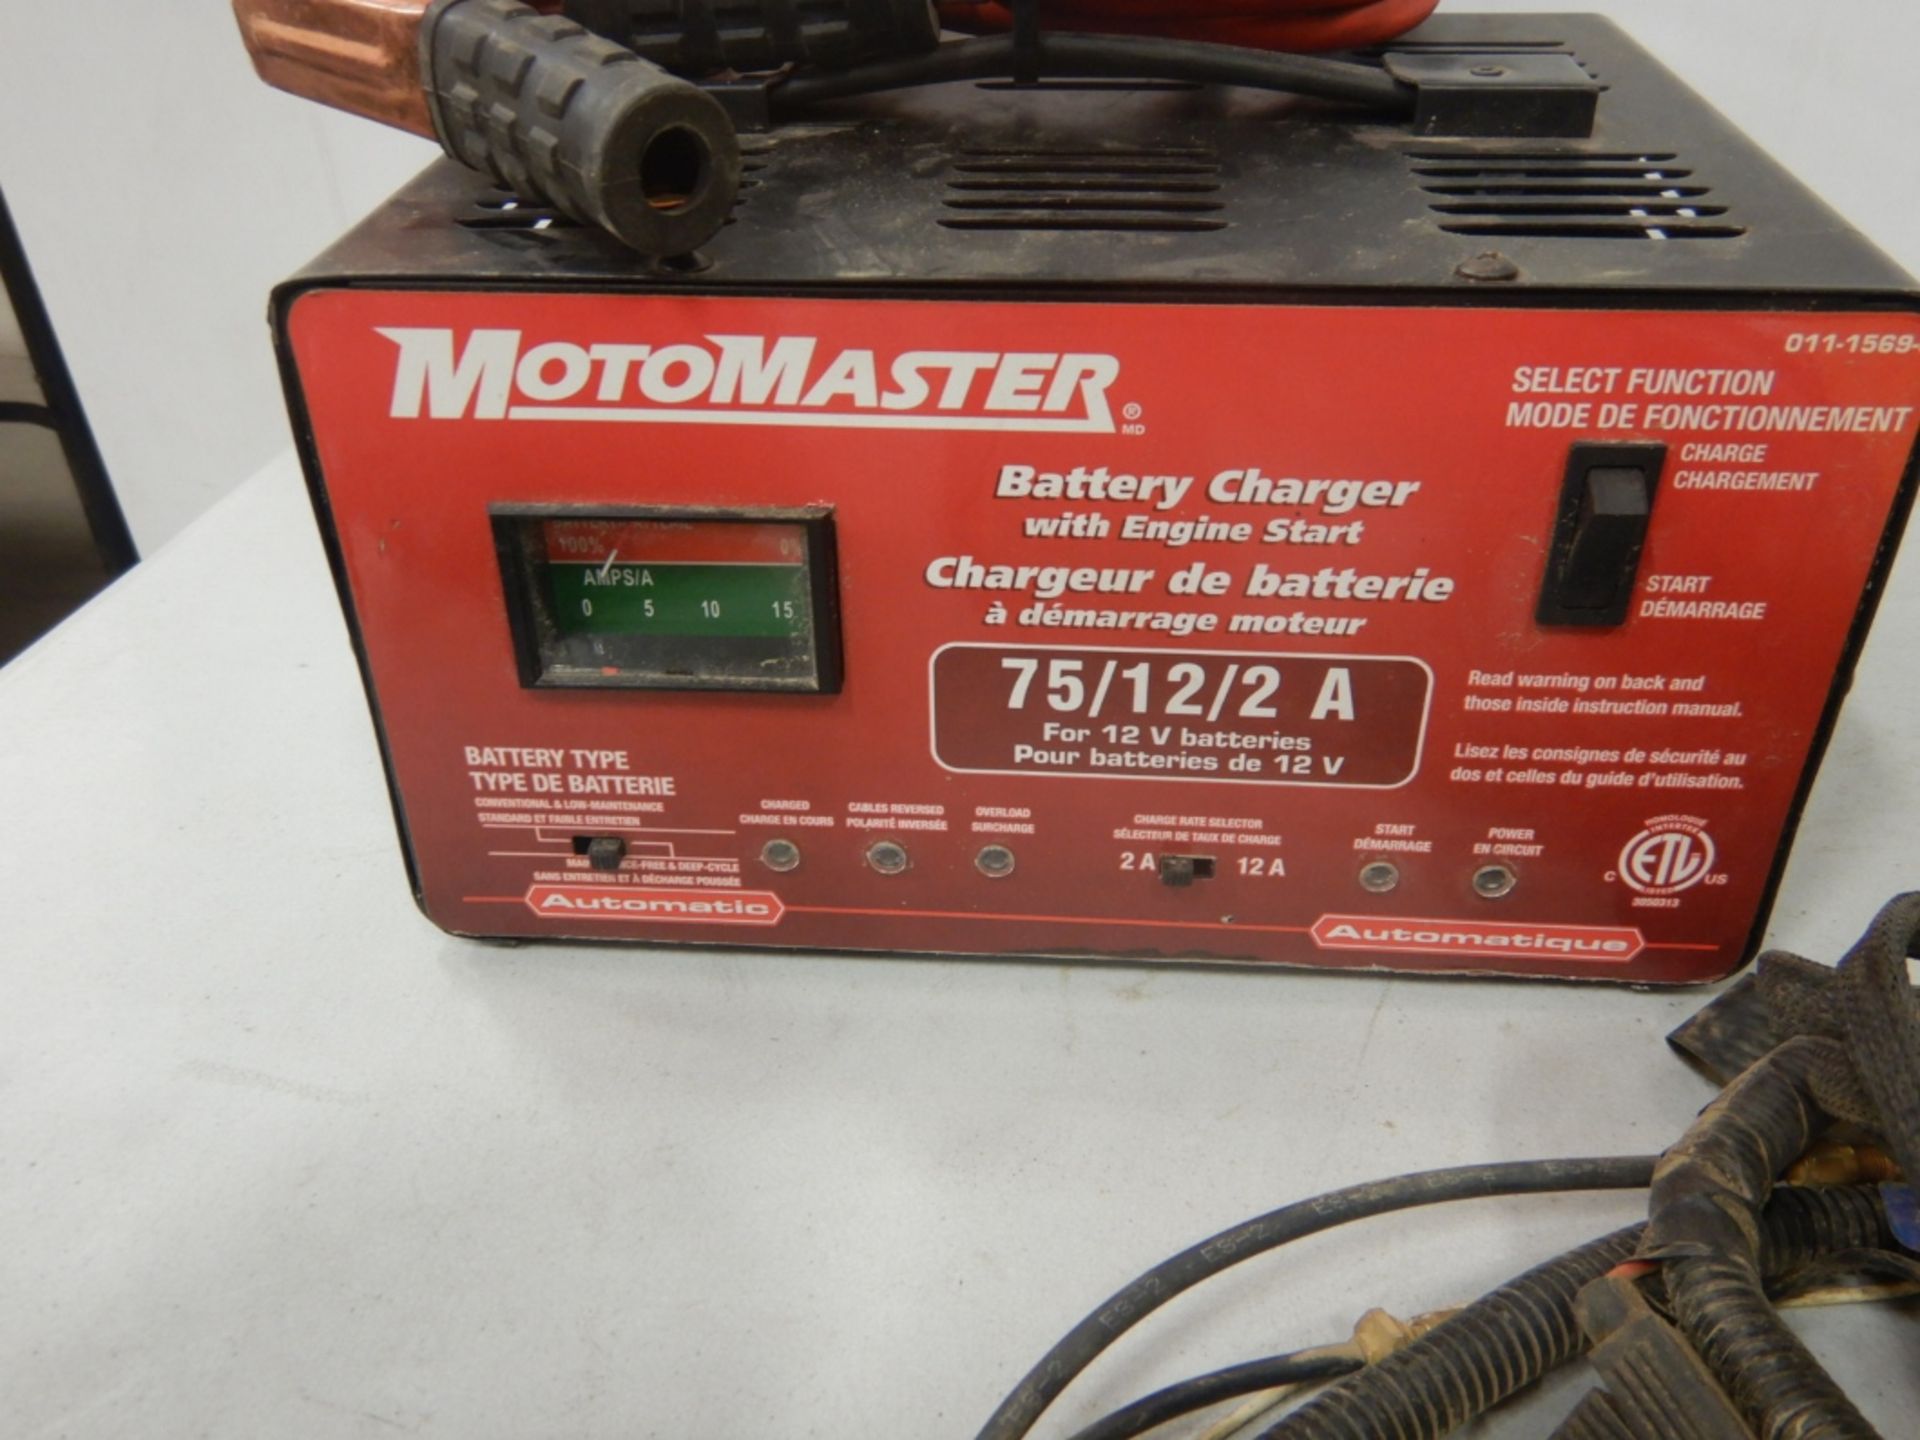 MOTOMASTER BATTERY CHARGER W/ ENGINE START, DRILL BIT SHARPENER, GPS TRACKERS - Image 2 of 2